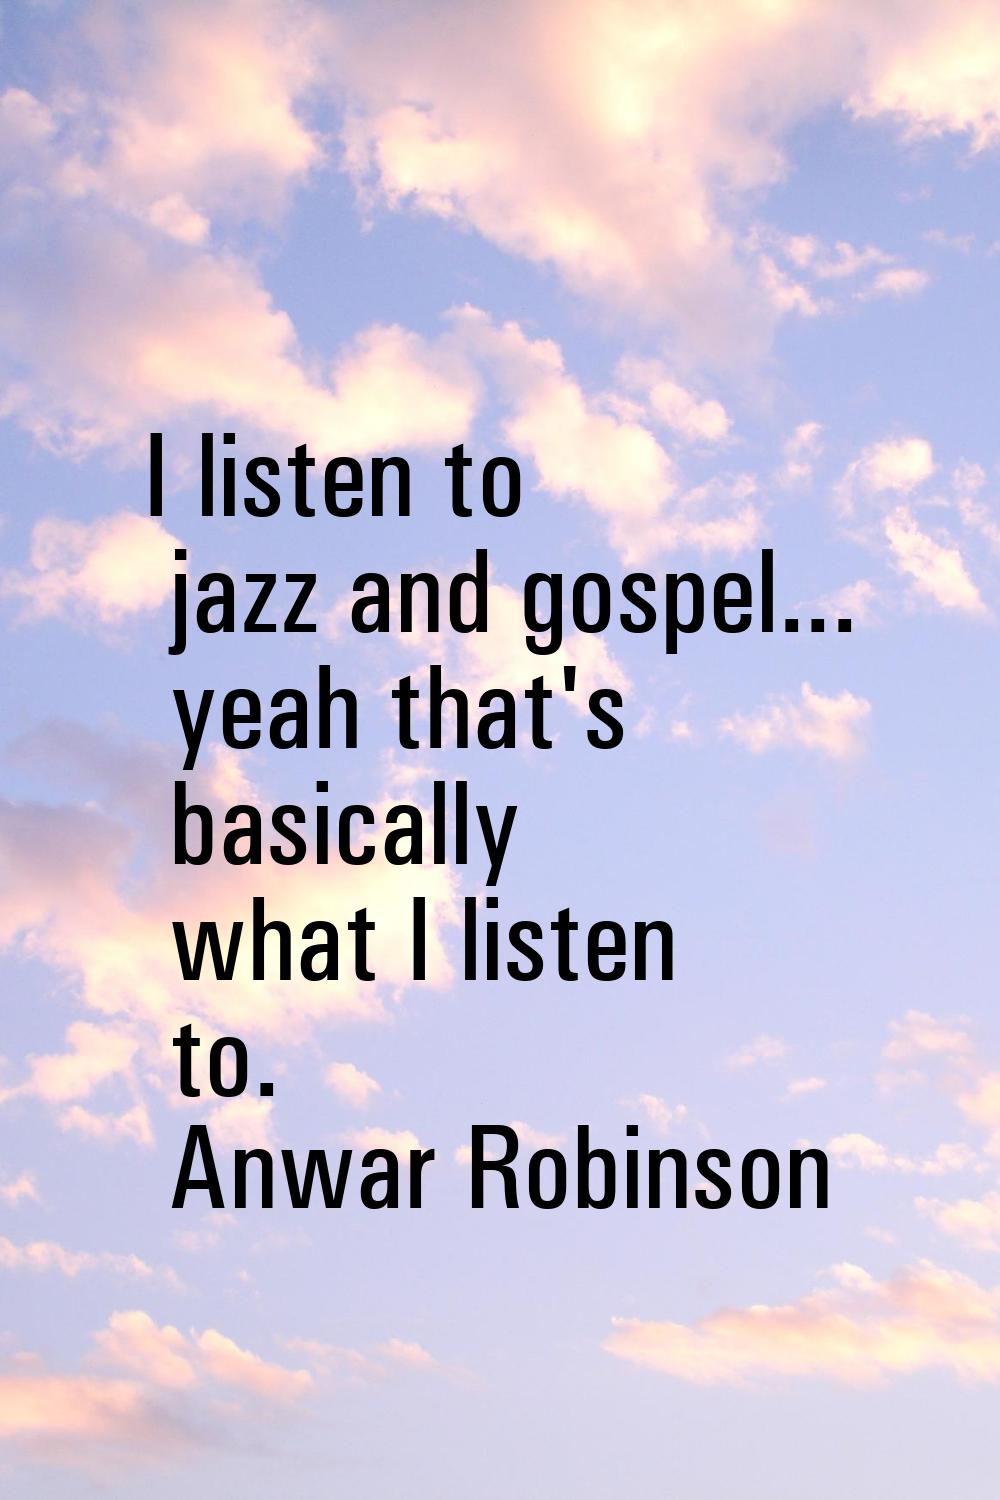 I listen to jazz and gospel... yeah that's basically what I listen to.